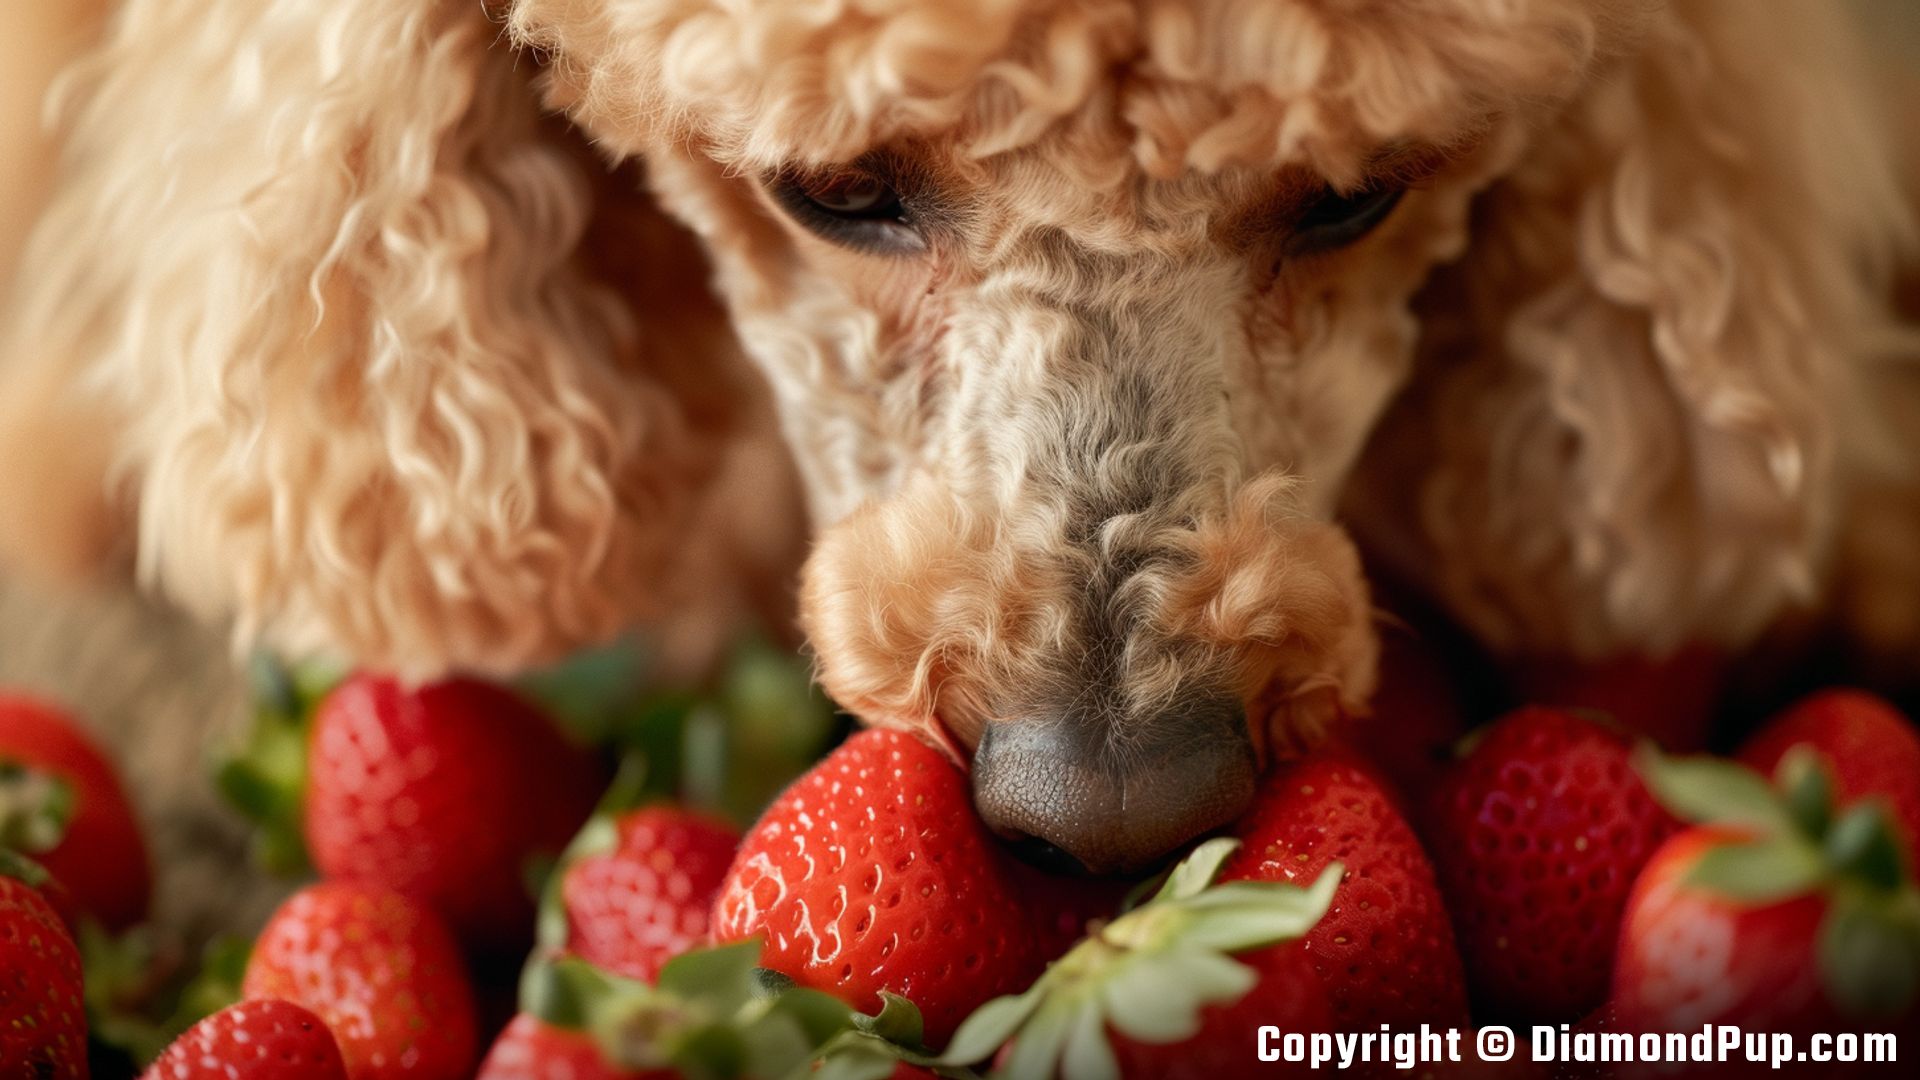 Photograph of a Cute Poodle Eating Strawberries